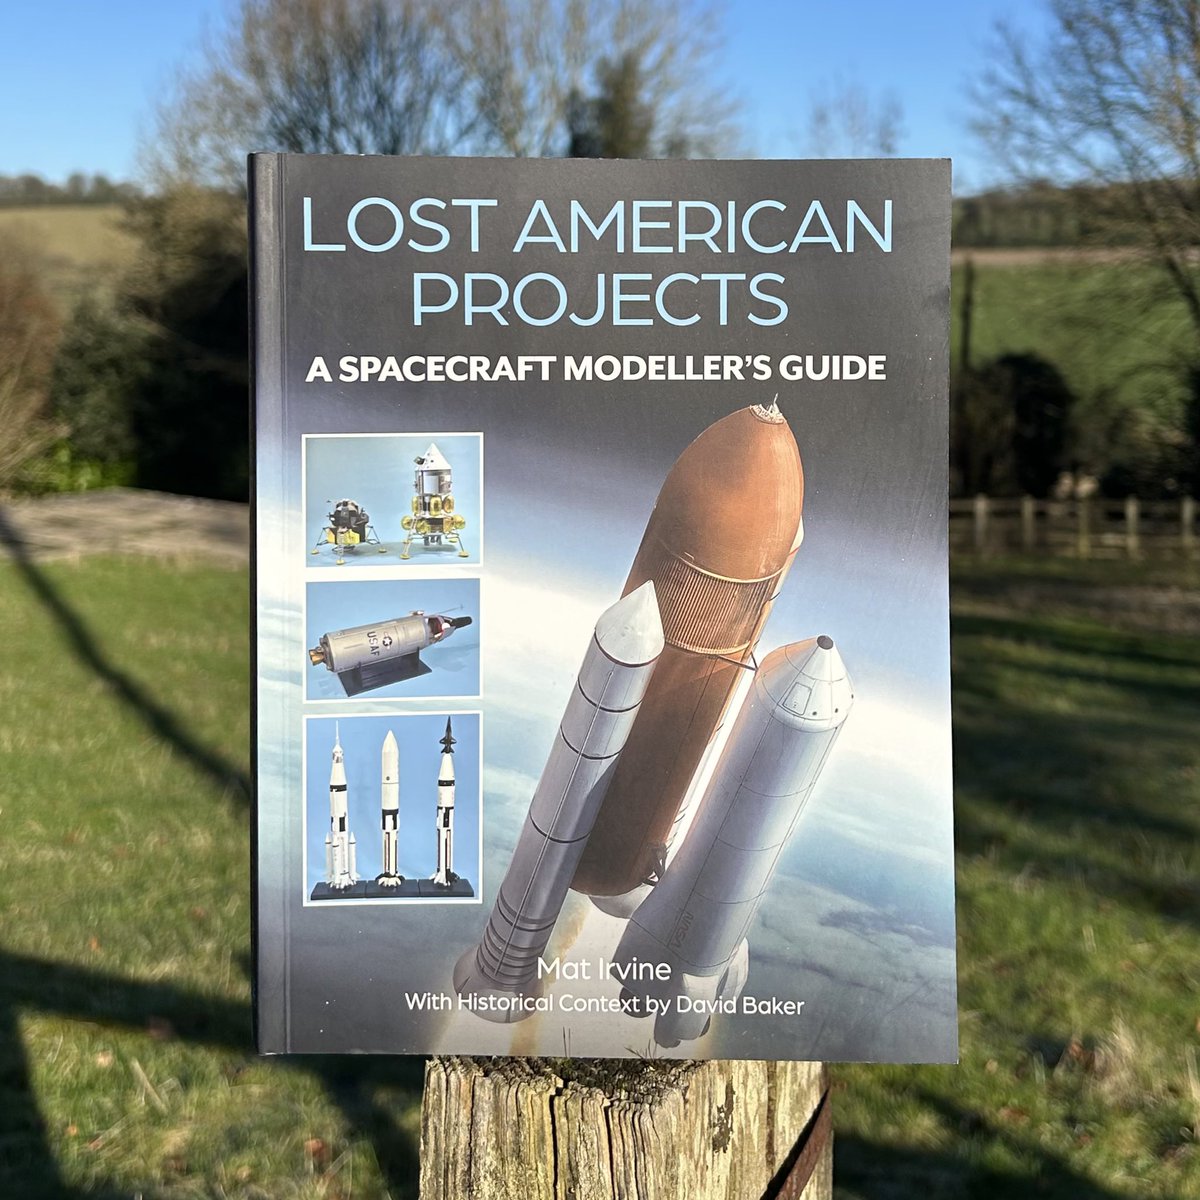 Introducing Lost American Projects: A Space Modeller’s Guide by Mat Irvine and David Baker. 🚀 Bring to life America’s most amazing space projects that never were, using highly illustrated step-by-step guides. #crowood #thecrowoodpress #spacecraft #americanspaceprogram